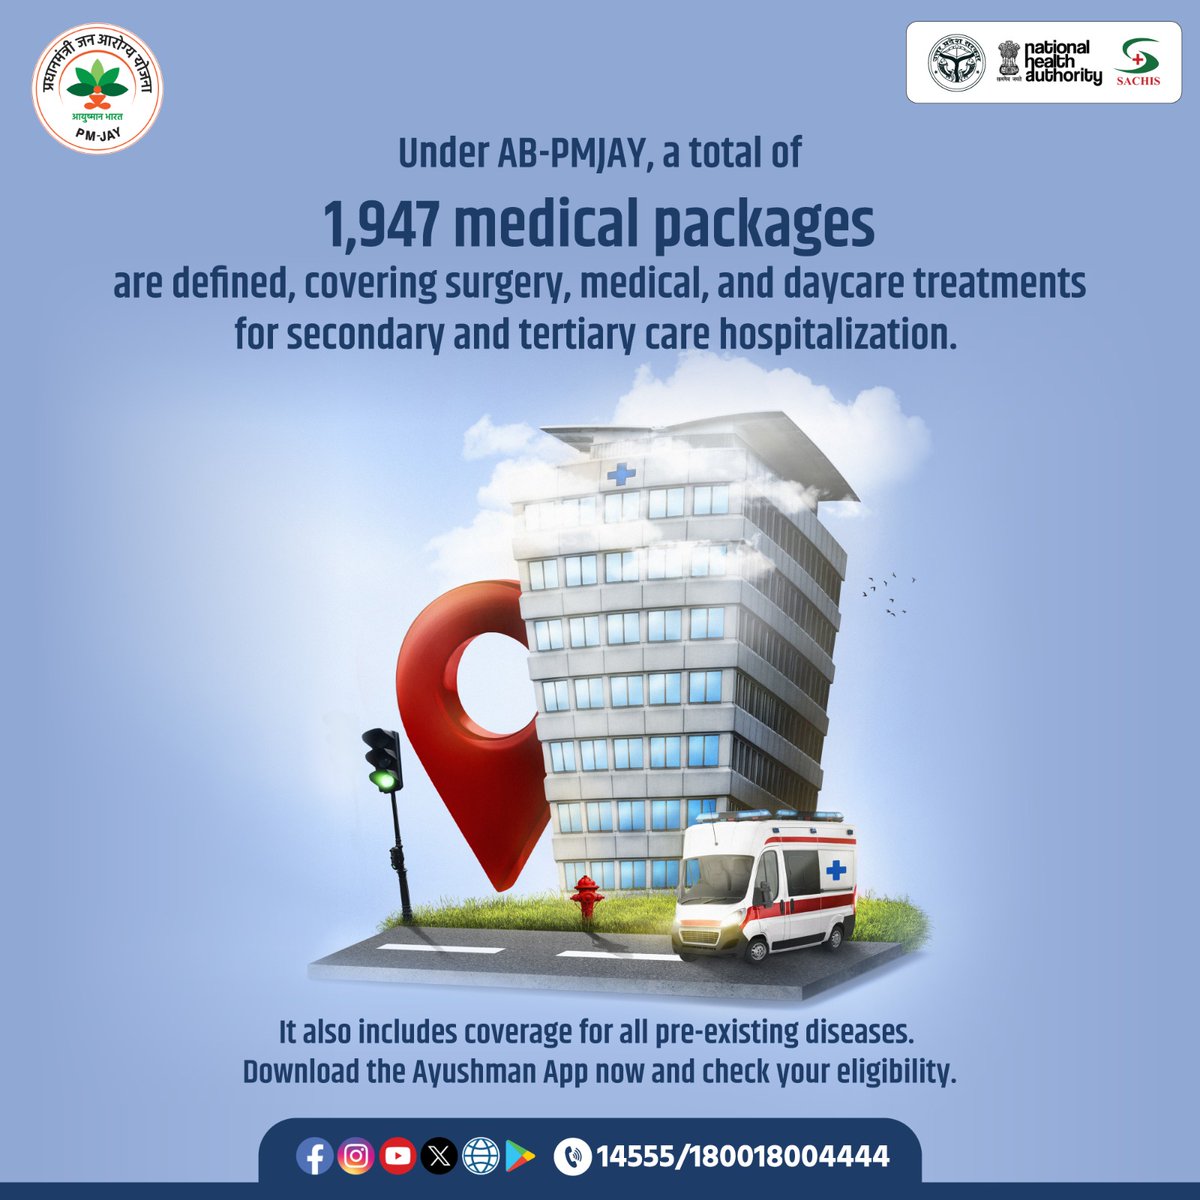 #AyushmanBharatYojana covers several medical packages, offering treatment to needy patients.

#HealthcareForNeedy #MedicalCoverage  #NeedyPatients #MedicalPackages #HealthcareScheme #AyushmanBenefit @AyushmanNHA @UPGovt @Sangeet82530151 @Sen2Partha @ChiefSecyUP